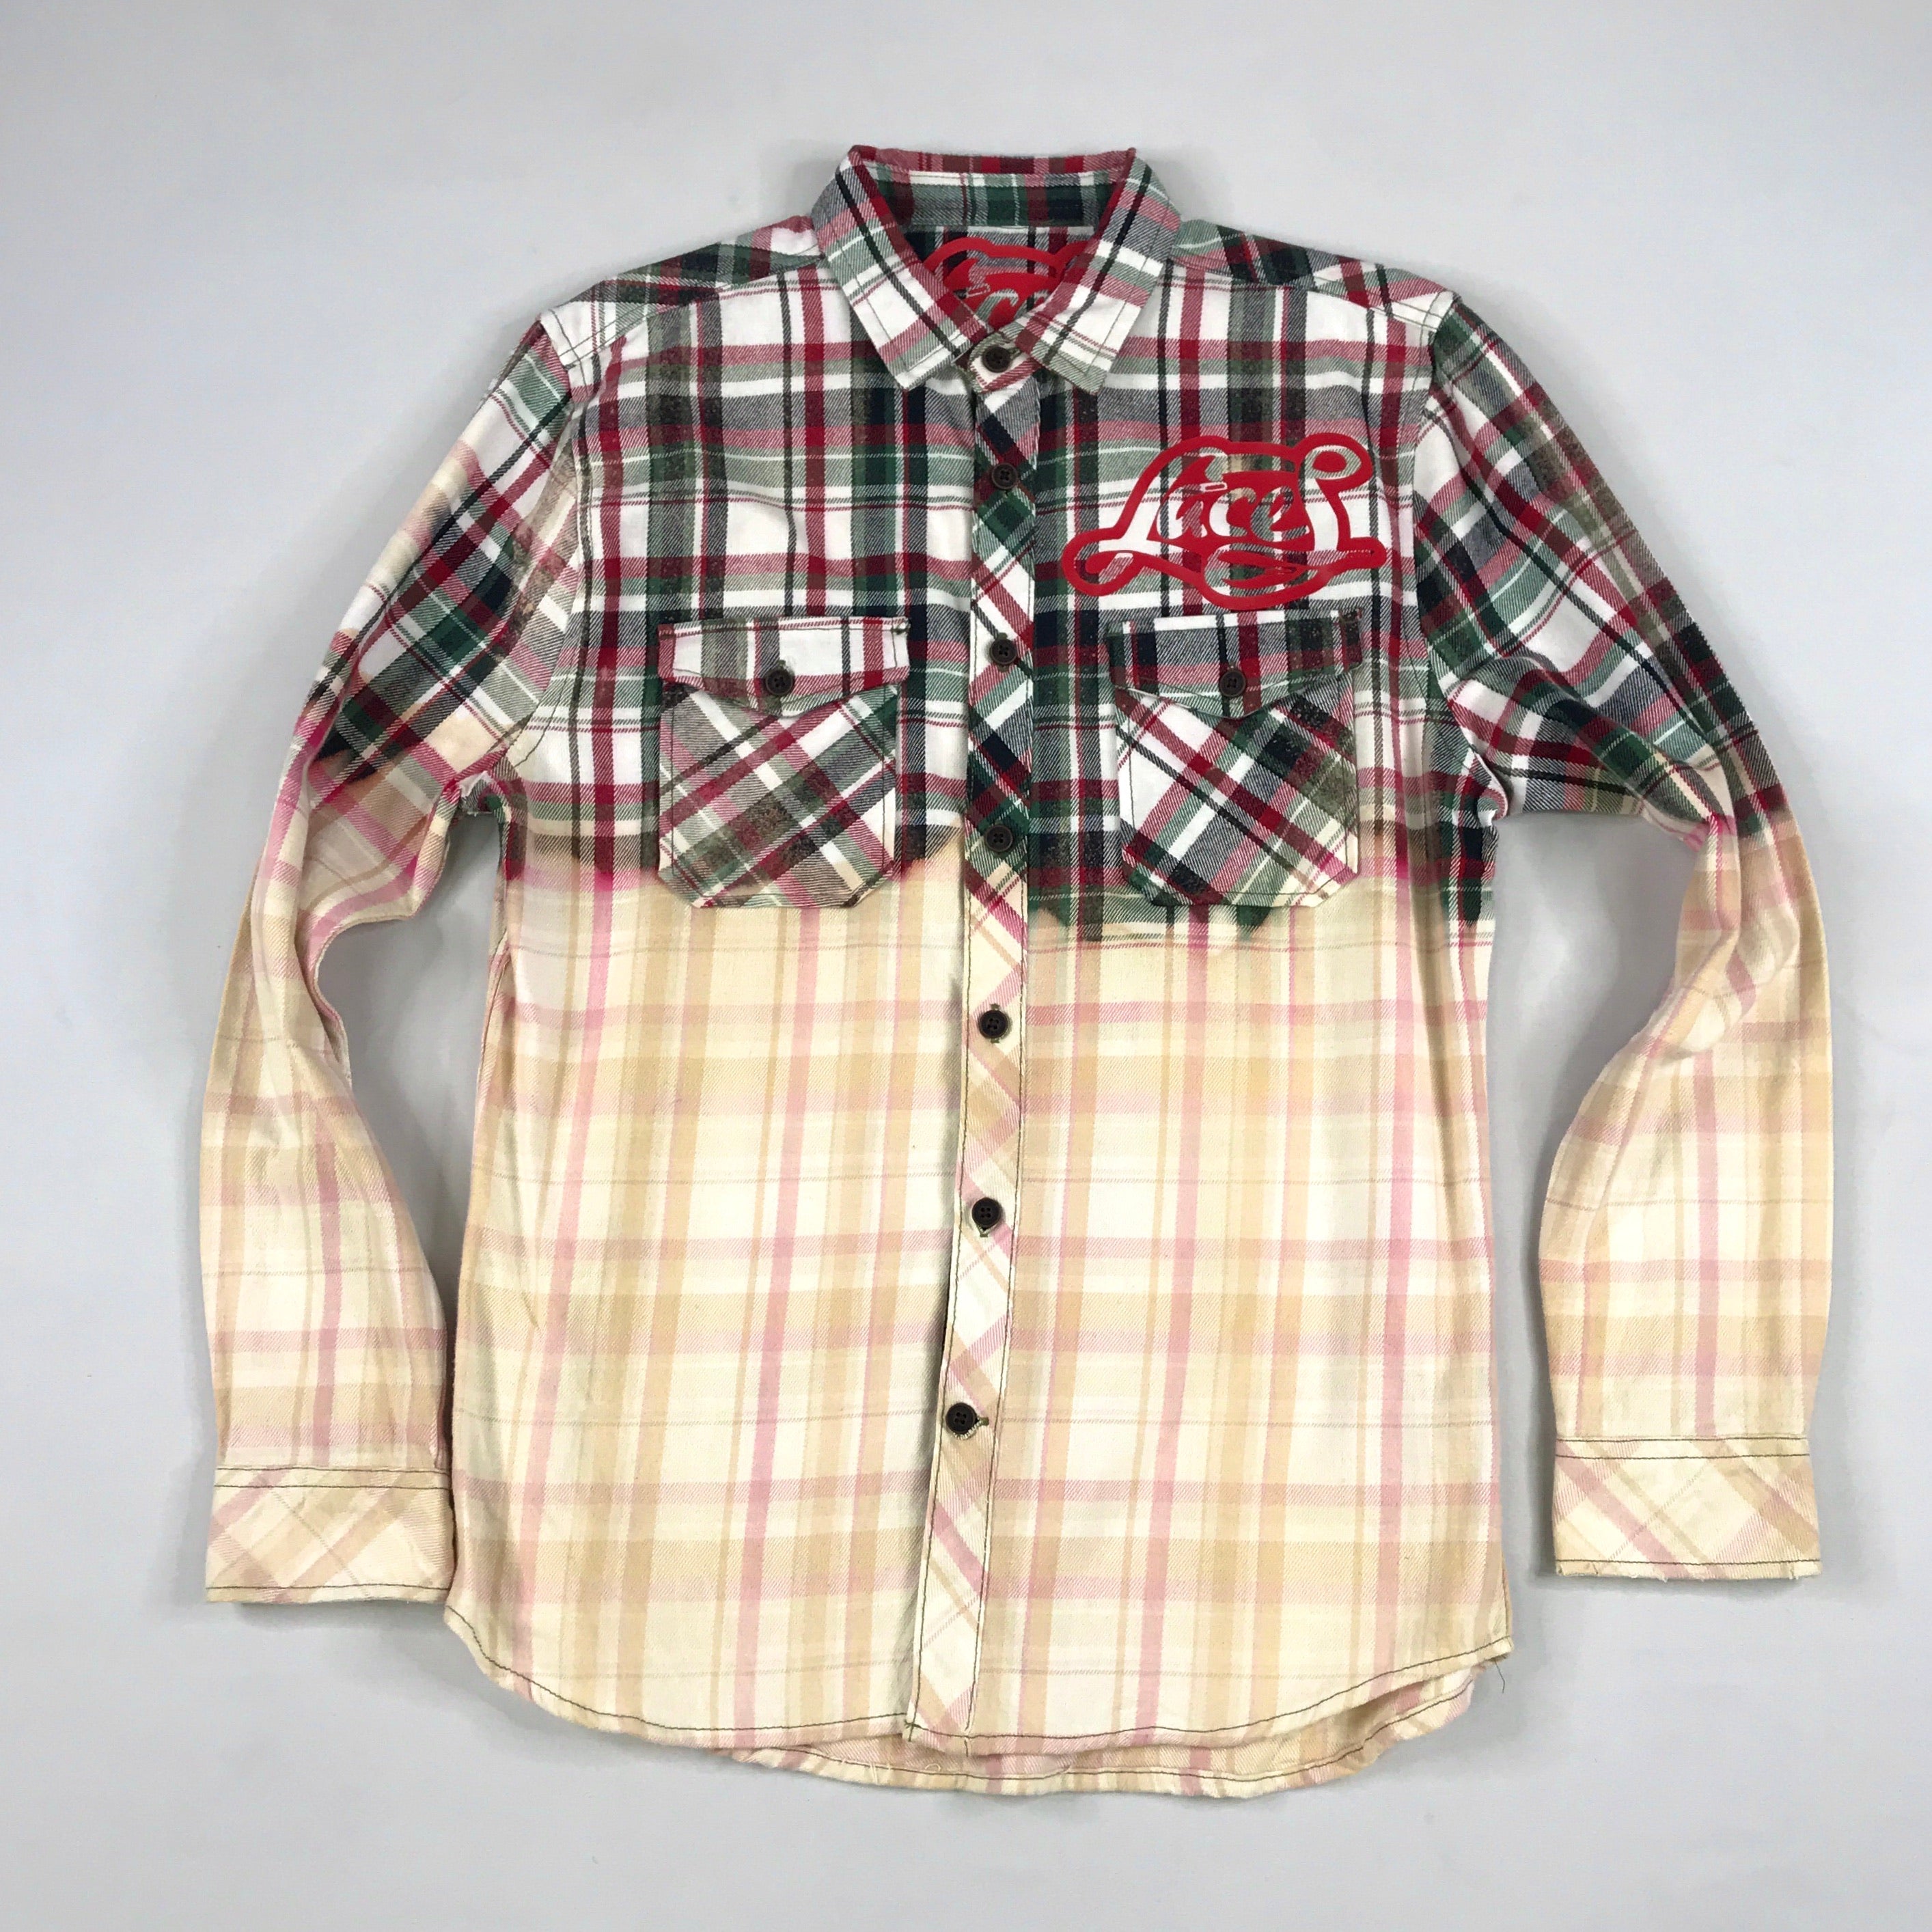 Laces bleached flannel in green/red